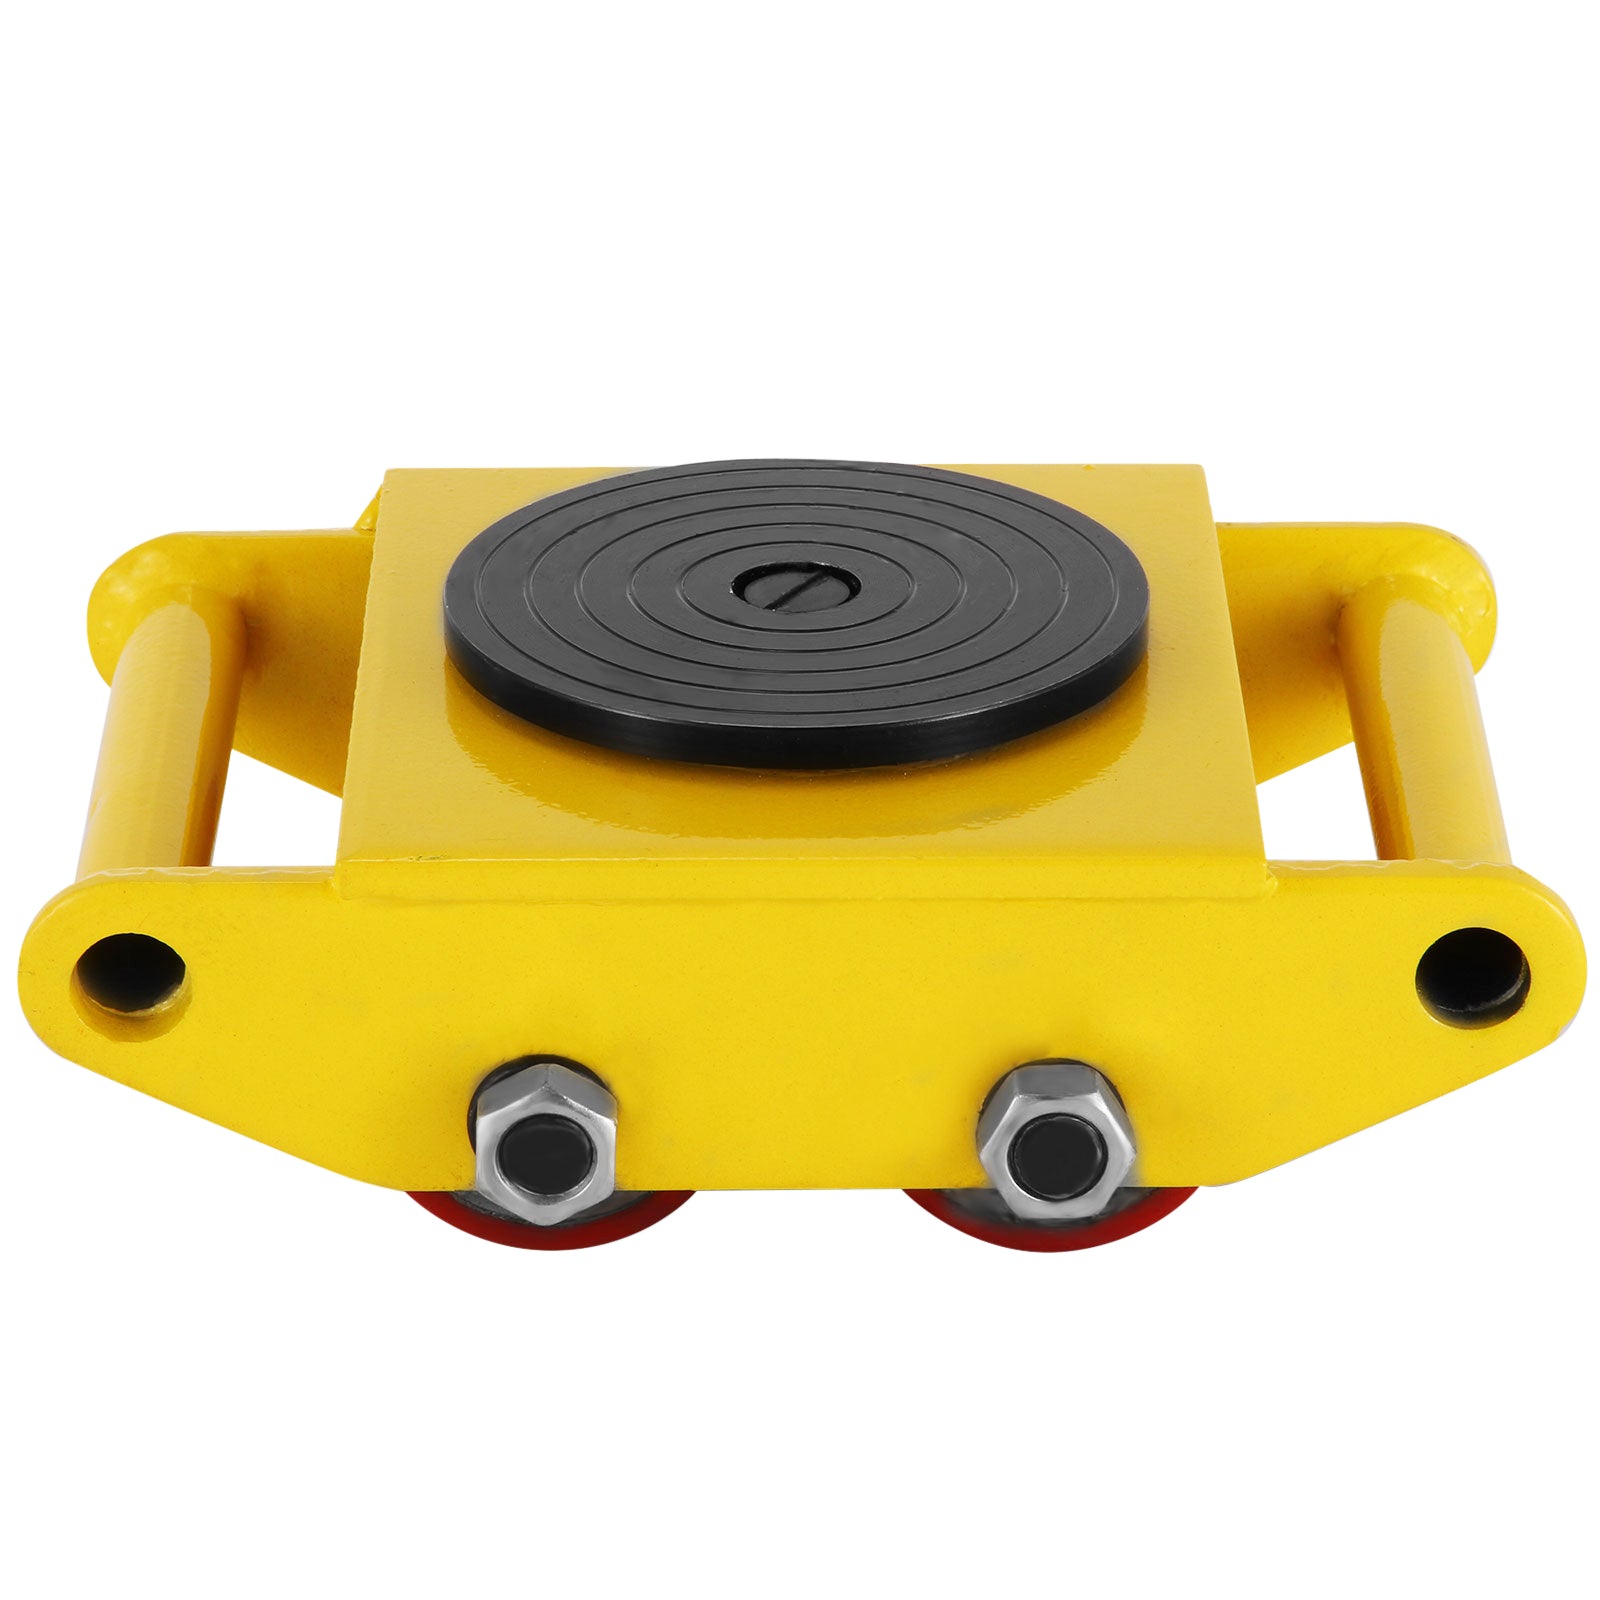 Industrial Machinery Mover With 360°rotation Cap 13200lbs Dolly Skate ...